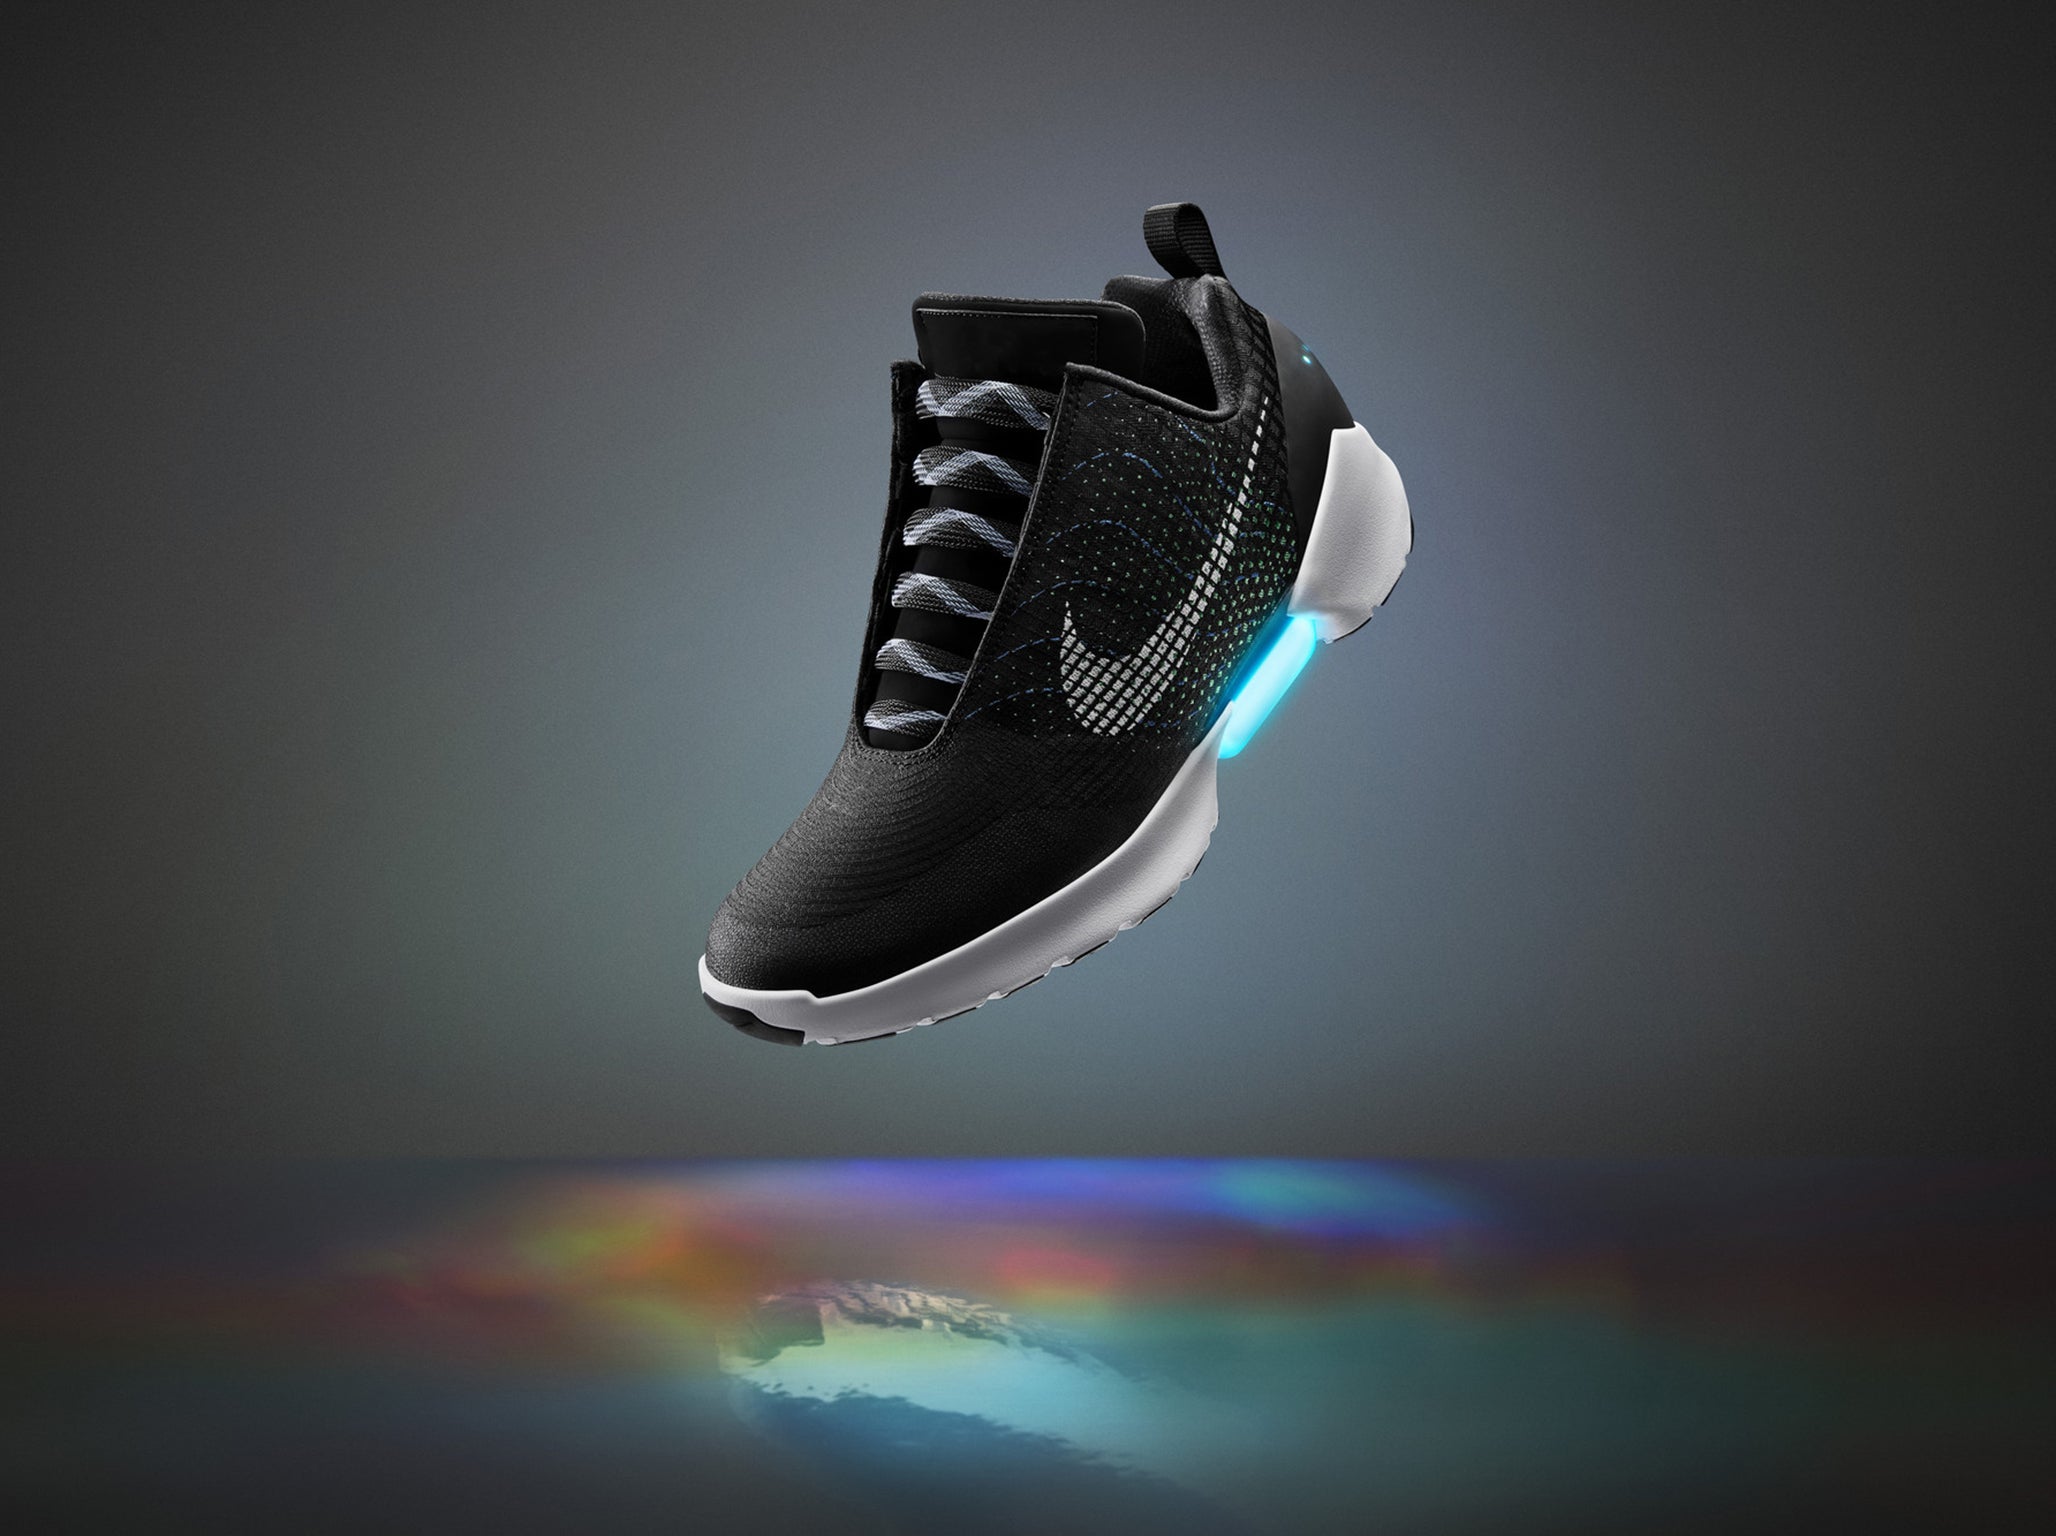 Nike HyperAdapt 1.0: Company launches real, self-tying | Independent | The